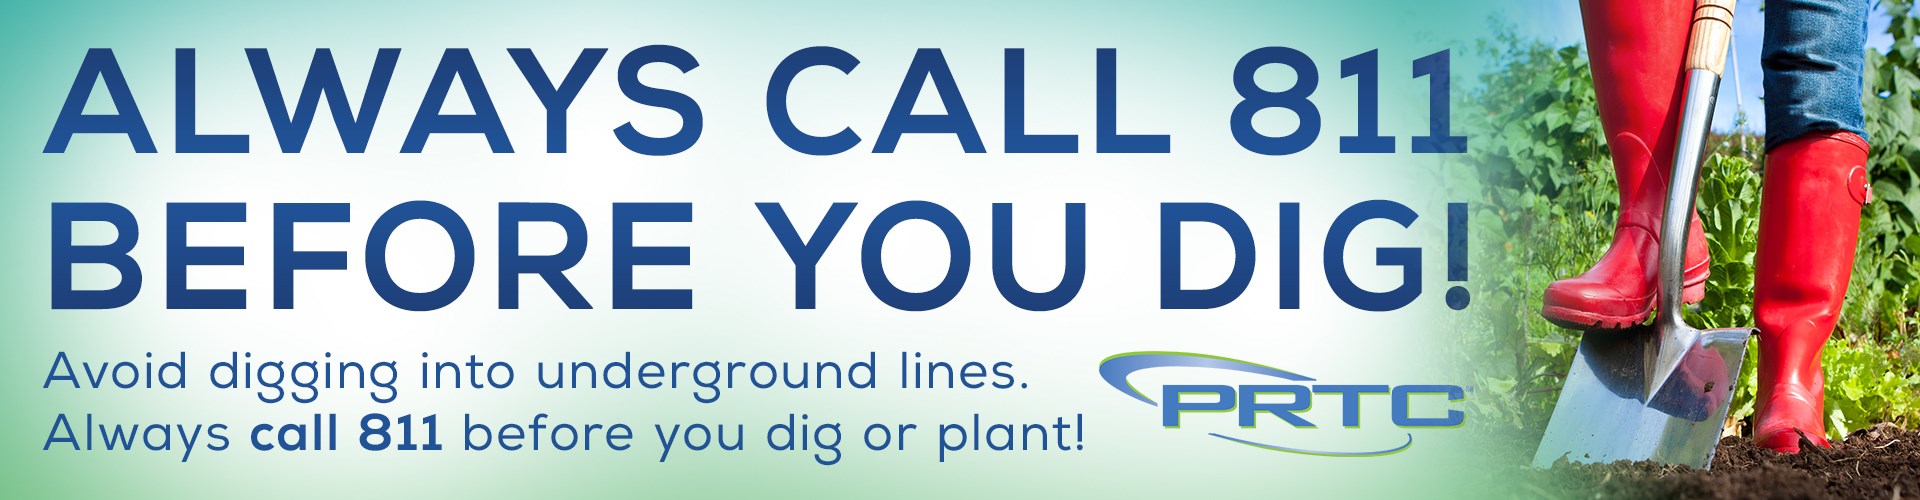 Call Before You Dig!